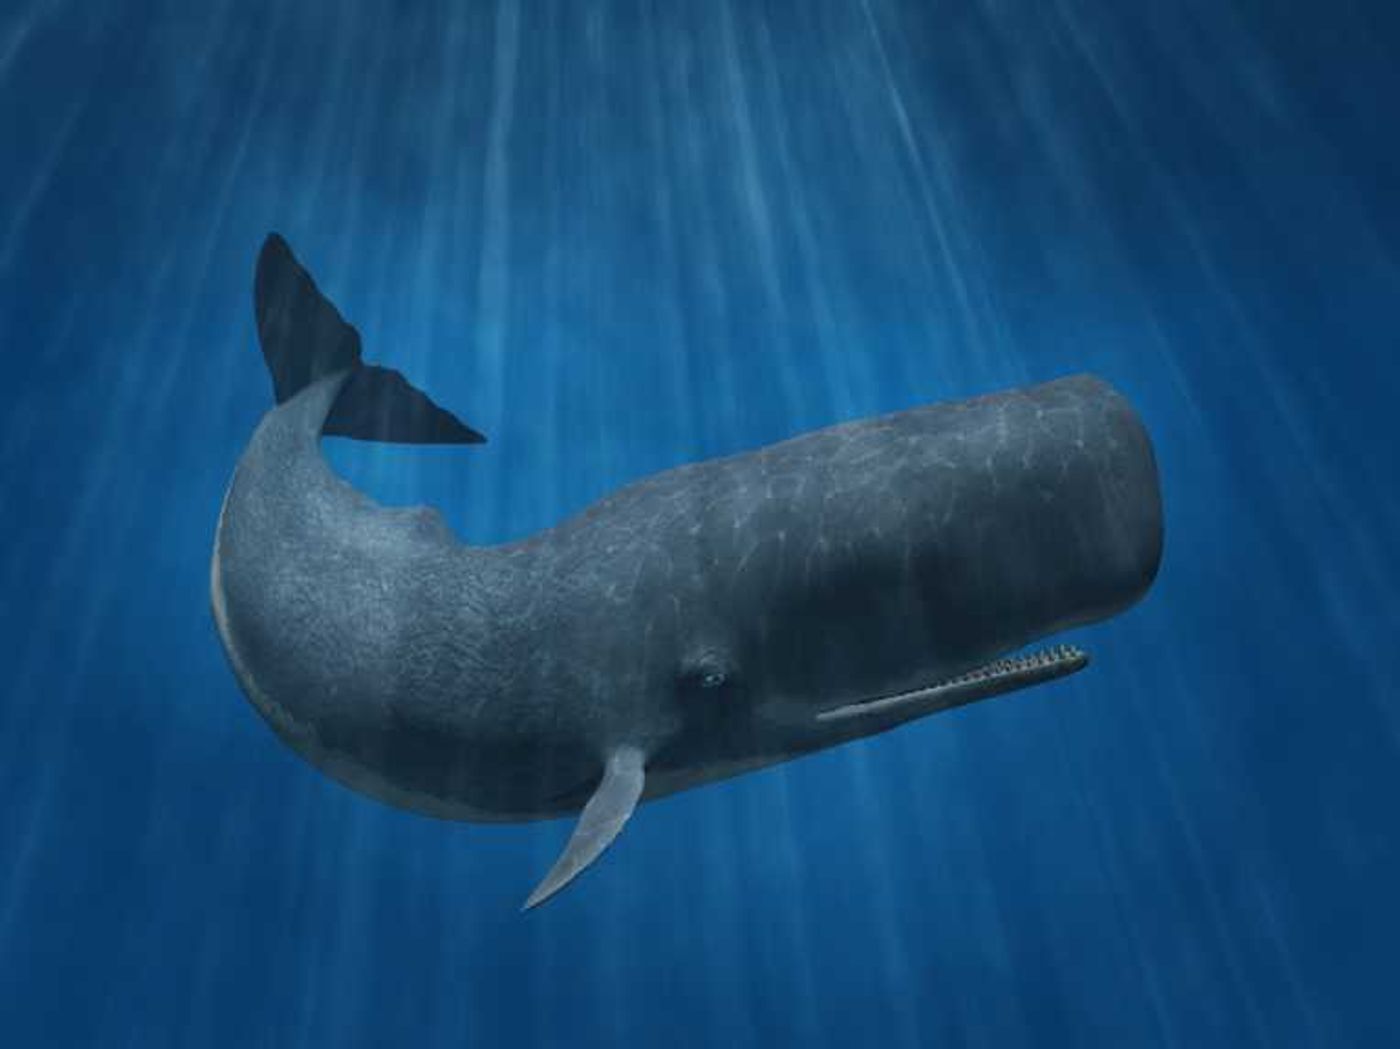 Sperm whales sometimes secrete a substance known as ambergris, which is very valuable.